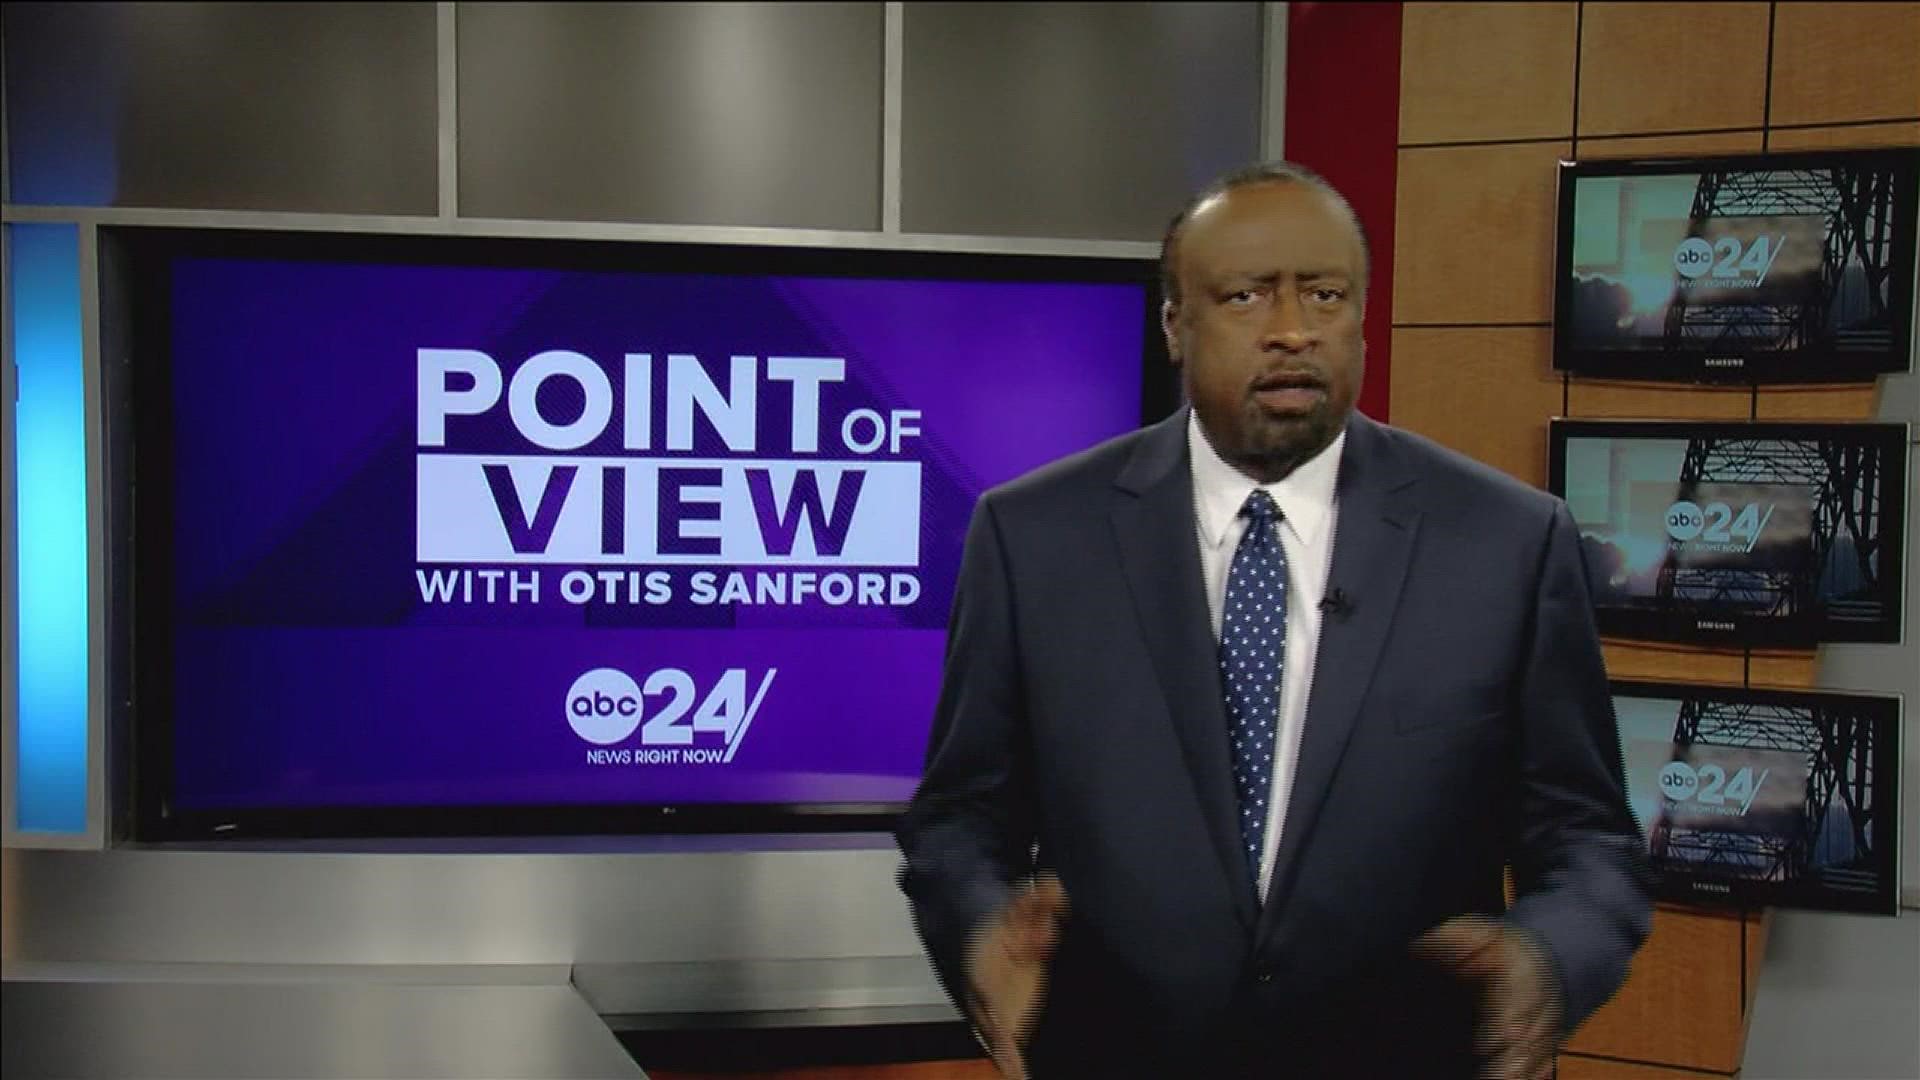 ABC 24 political analyst and commentator Otis Sanford shared his point of view on the St. Jude Marathon this weekend.